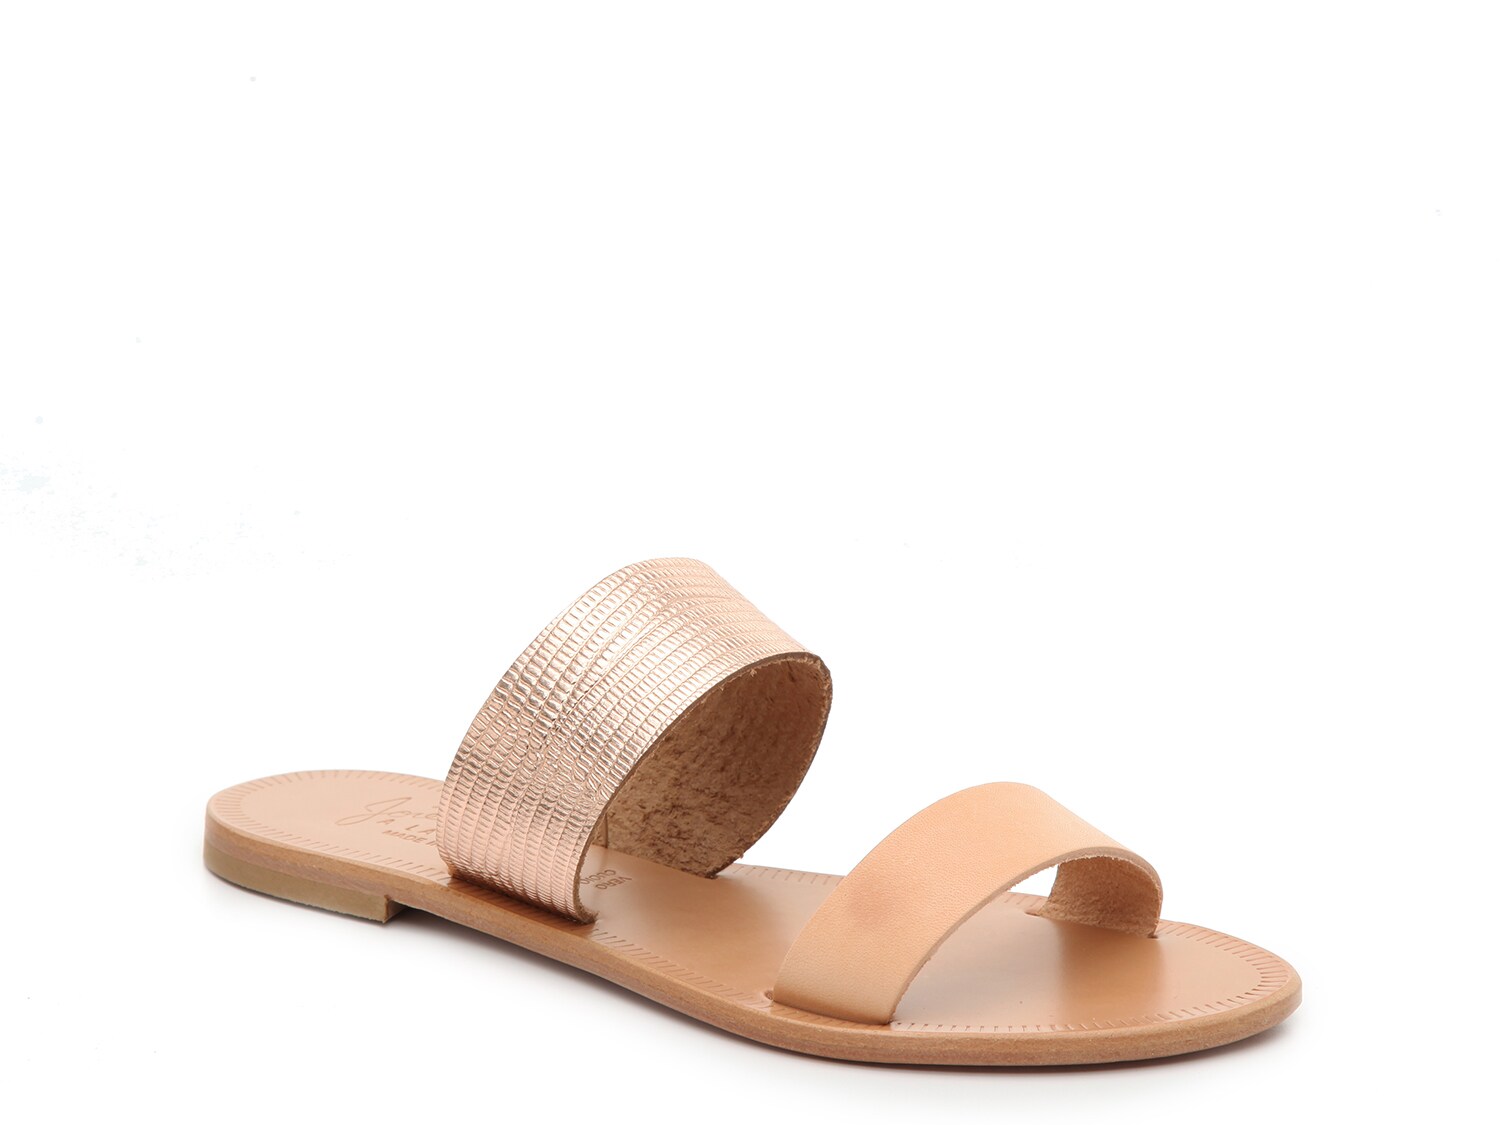 Joie Sable Sandal - Free Shipping | DSW